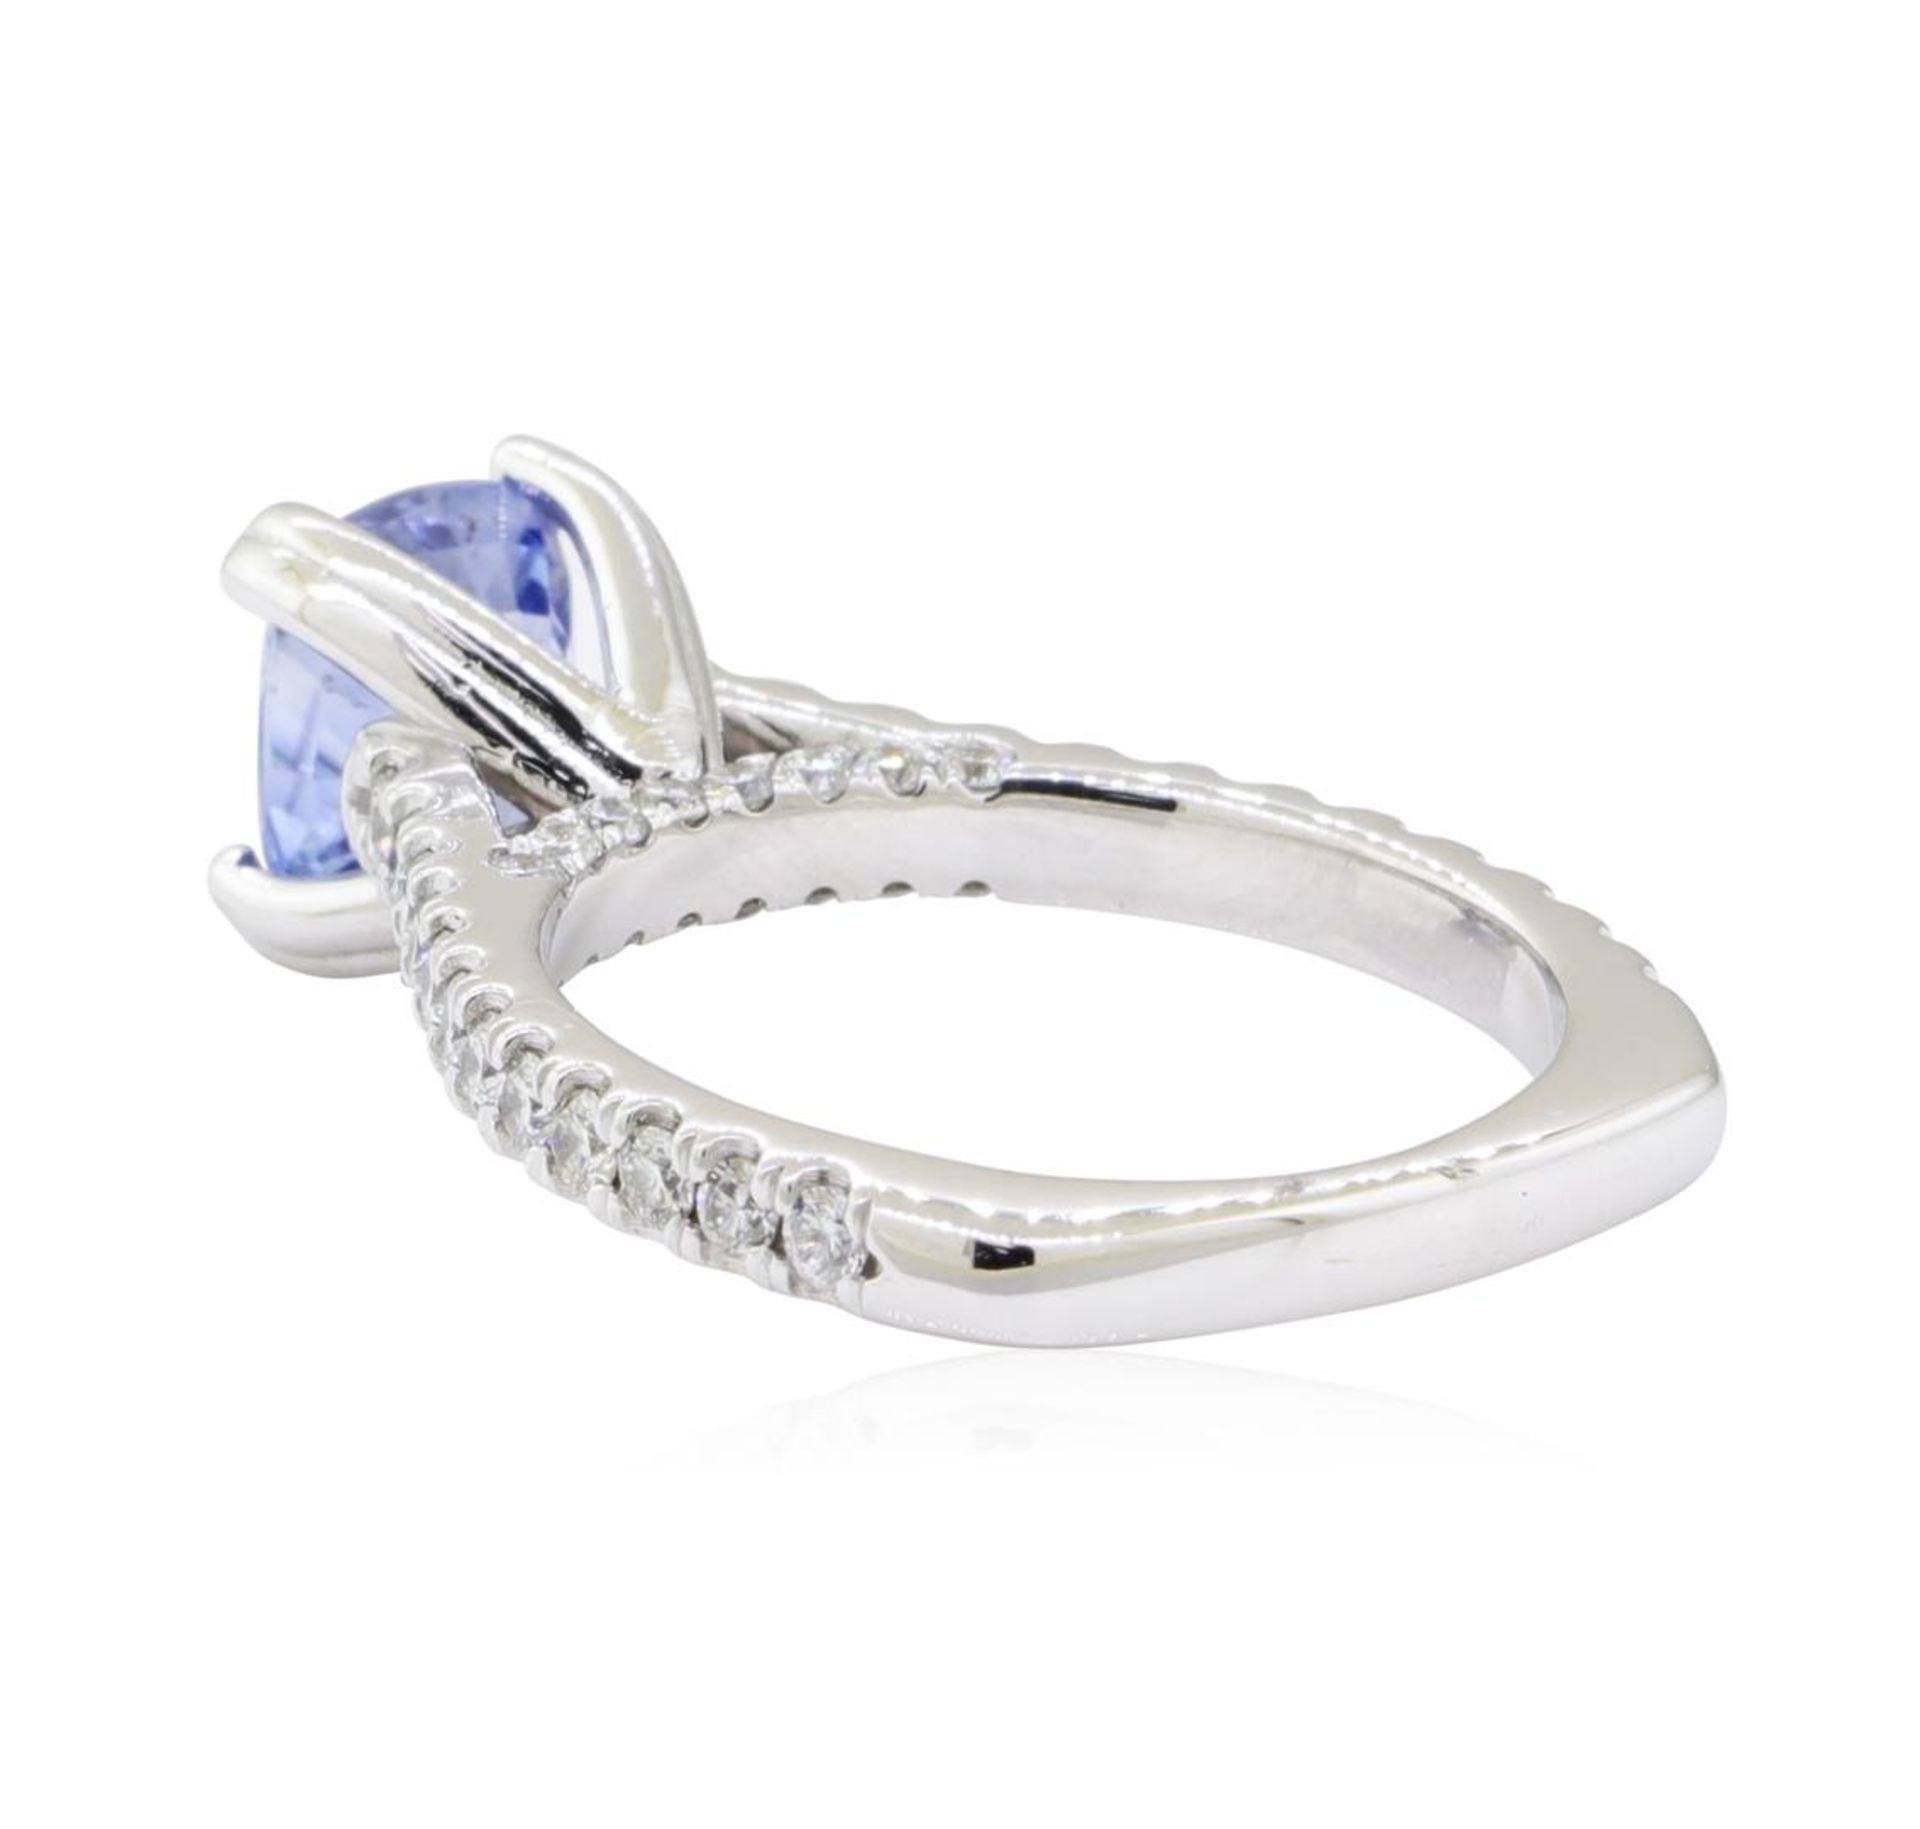 3.06 ctw Sapphire and Diamond Ring - 14KT White Gold - Image 3 of 5